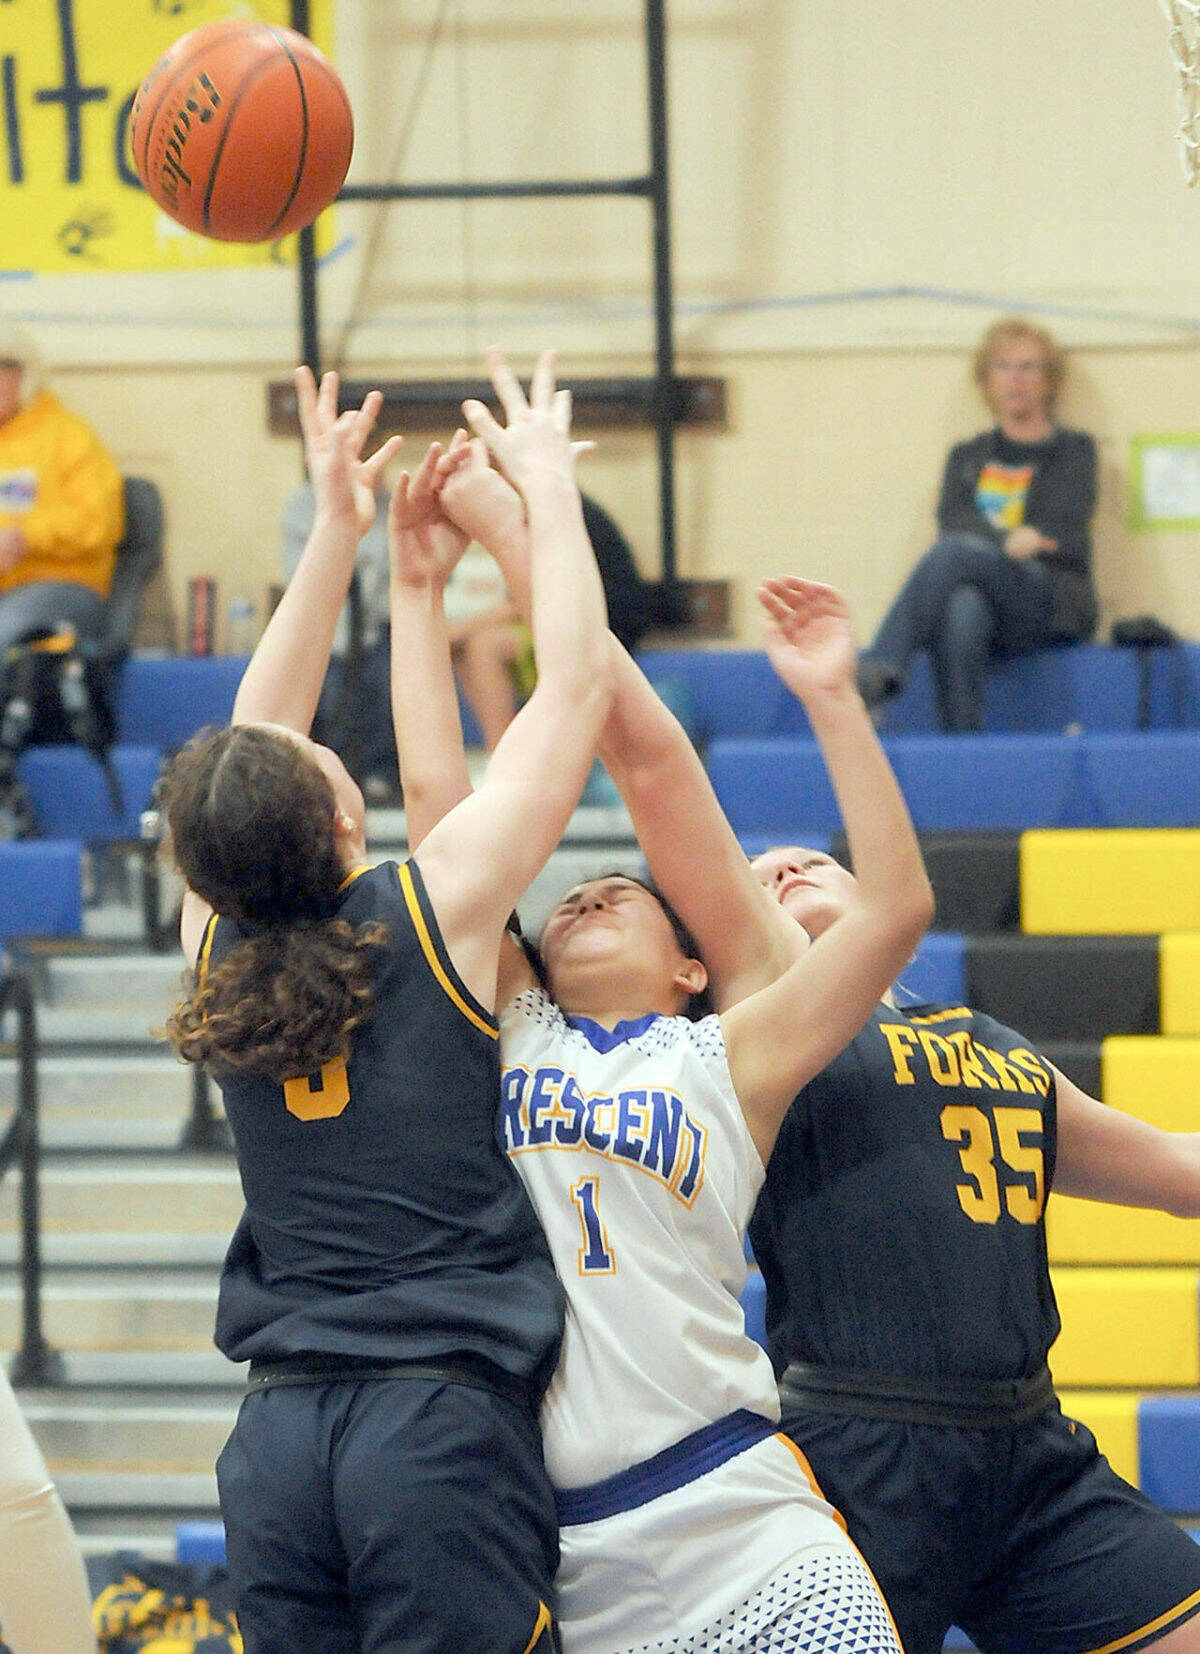 Crescent’s Ciara Cargo-Acosta, center, reaches for a rebound and is squeezed by Forks’ Keira Johnson, left, and Kyra Neel during Wednesday’s game at Crescent High School. (Keith Thorpe/Peninsula Daily News)